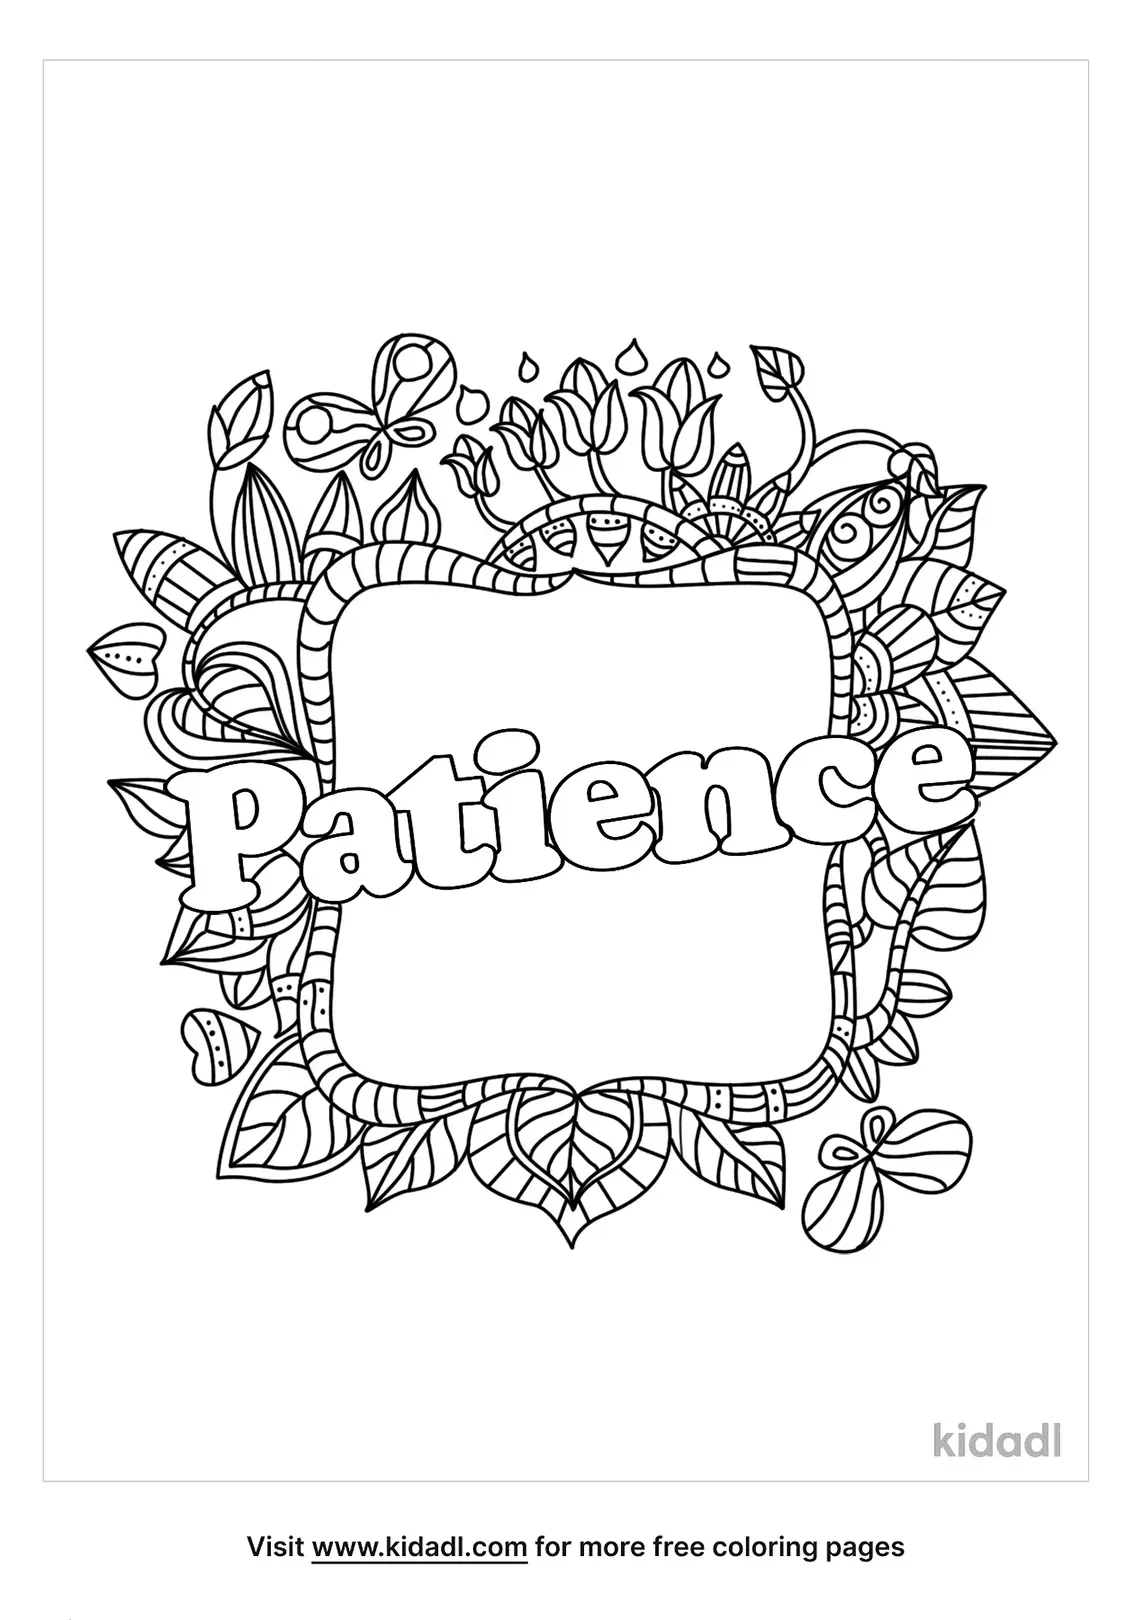 free-patience-coloring-page-coloring-page-printables-kidadl